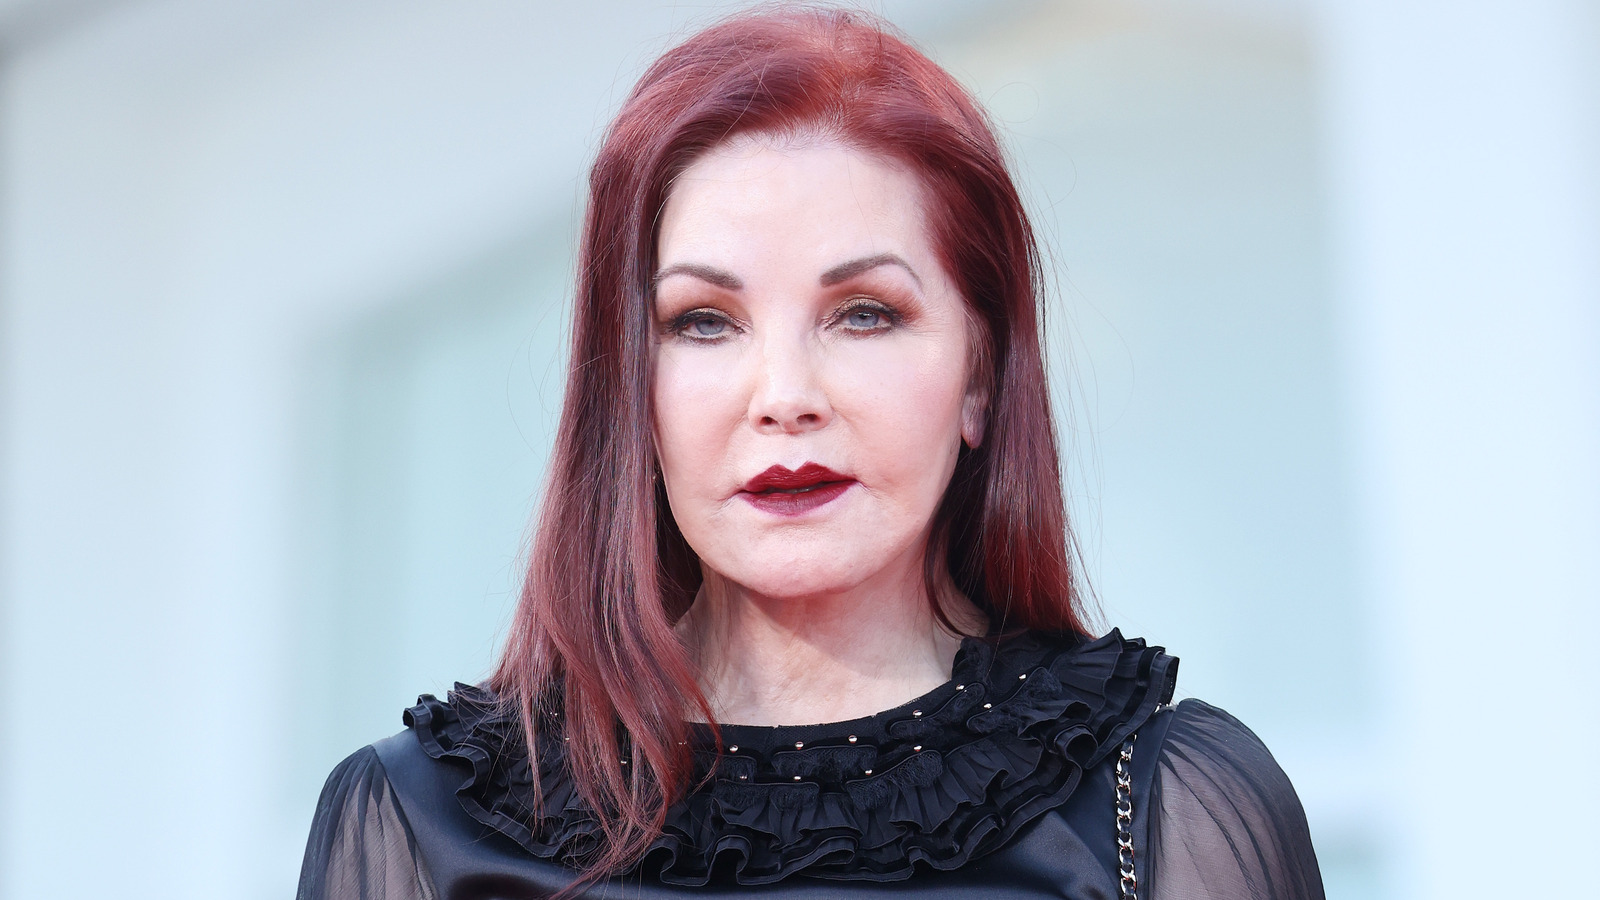 Why The Romance Between Robert Kardashian And Priscilla Presley Didn't Work Out